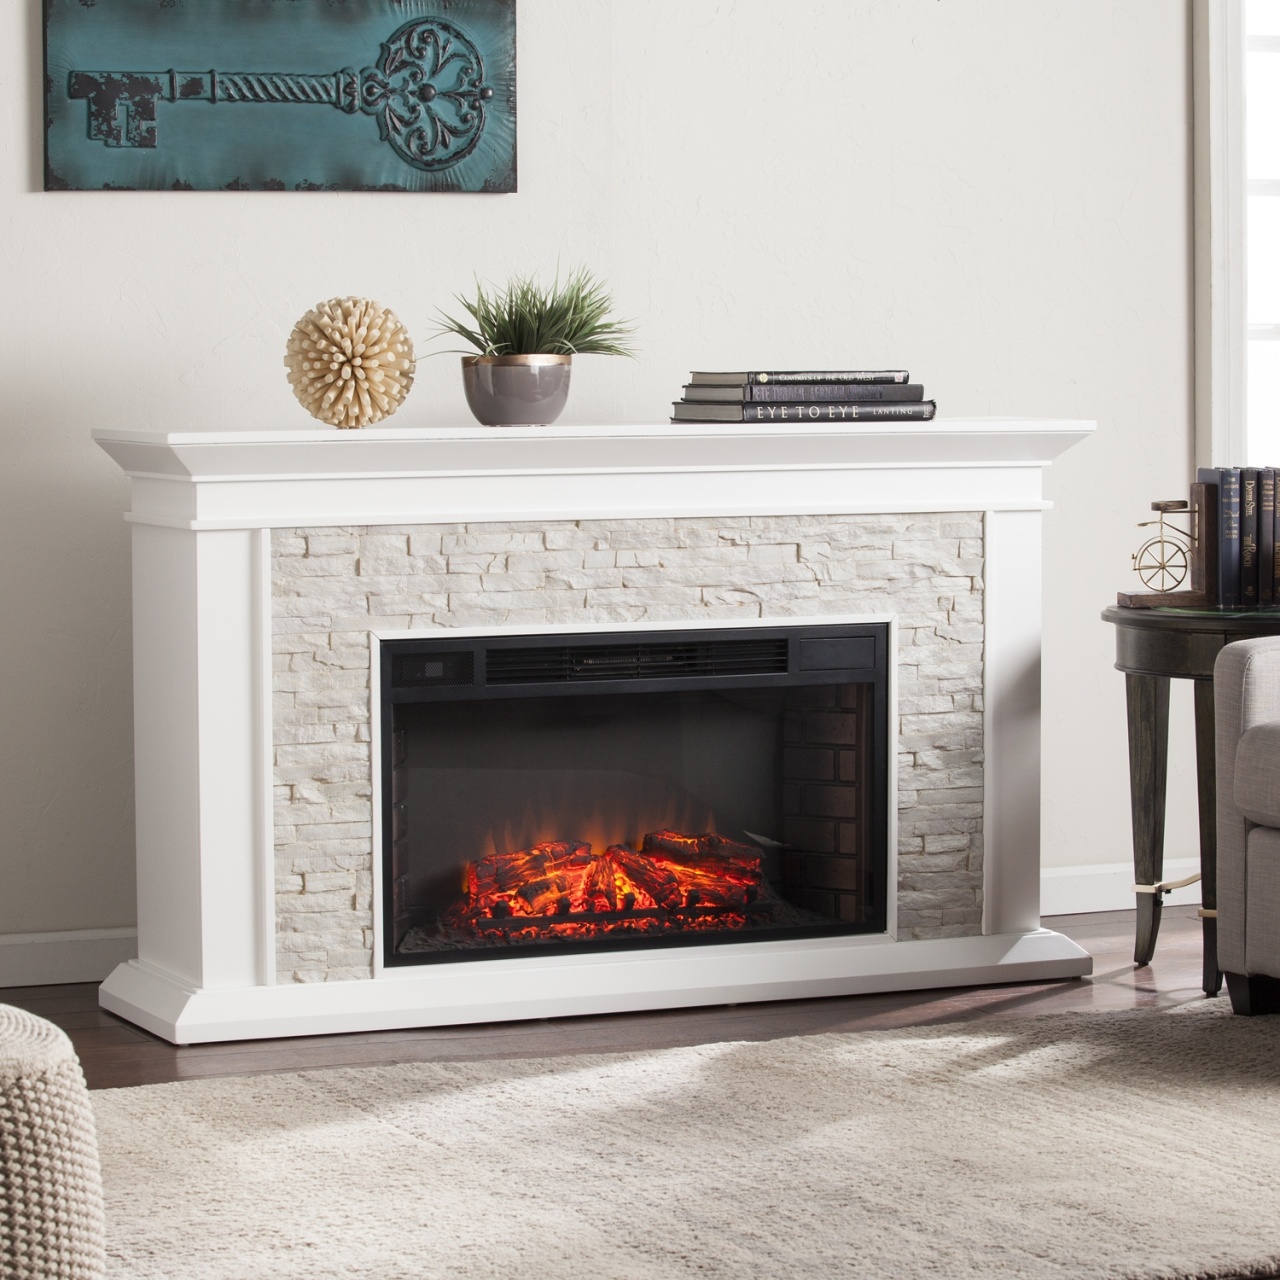 Big Lots Fireplaces Luxury Propane Fireplace Insert Vent Free – Fireplace Ideas From